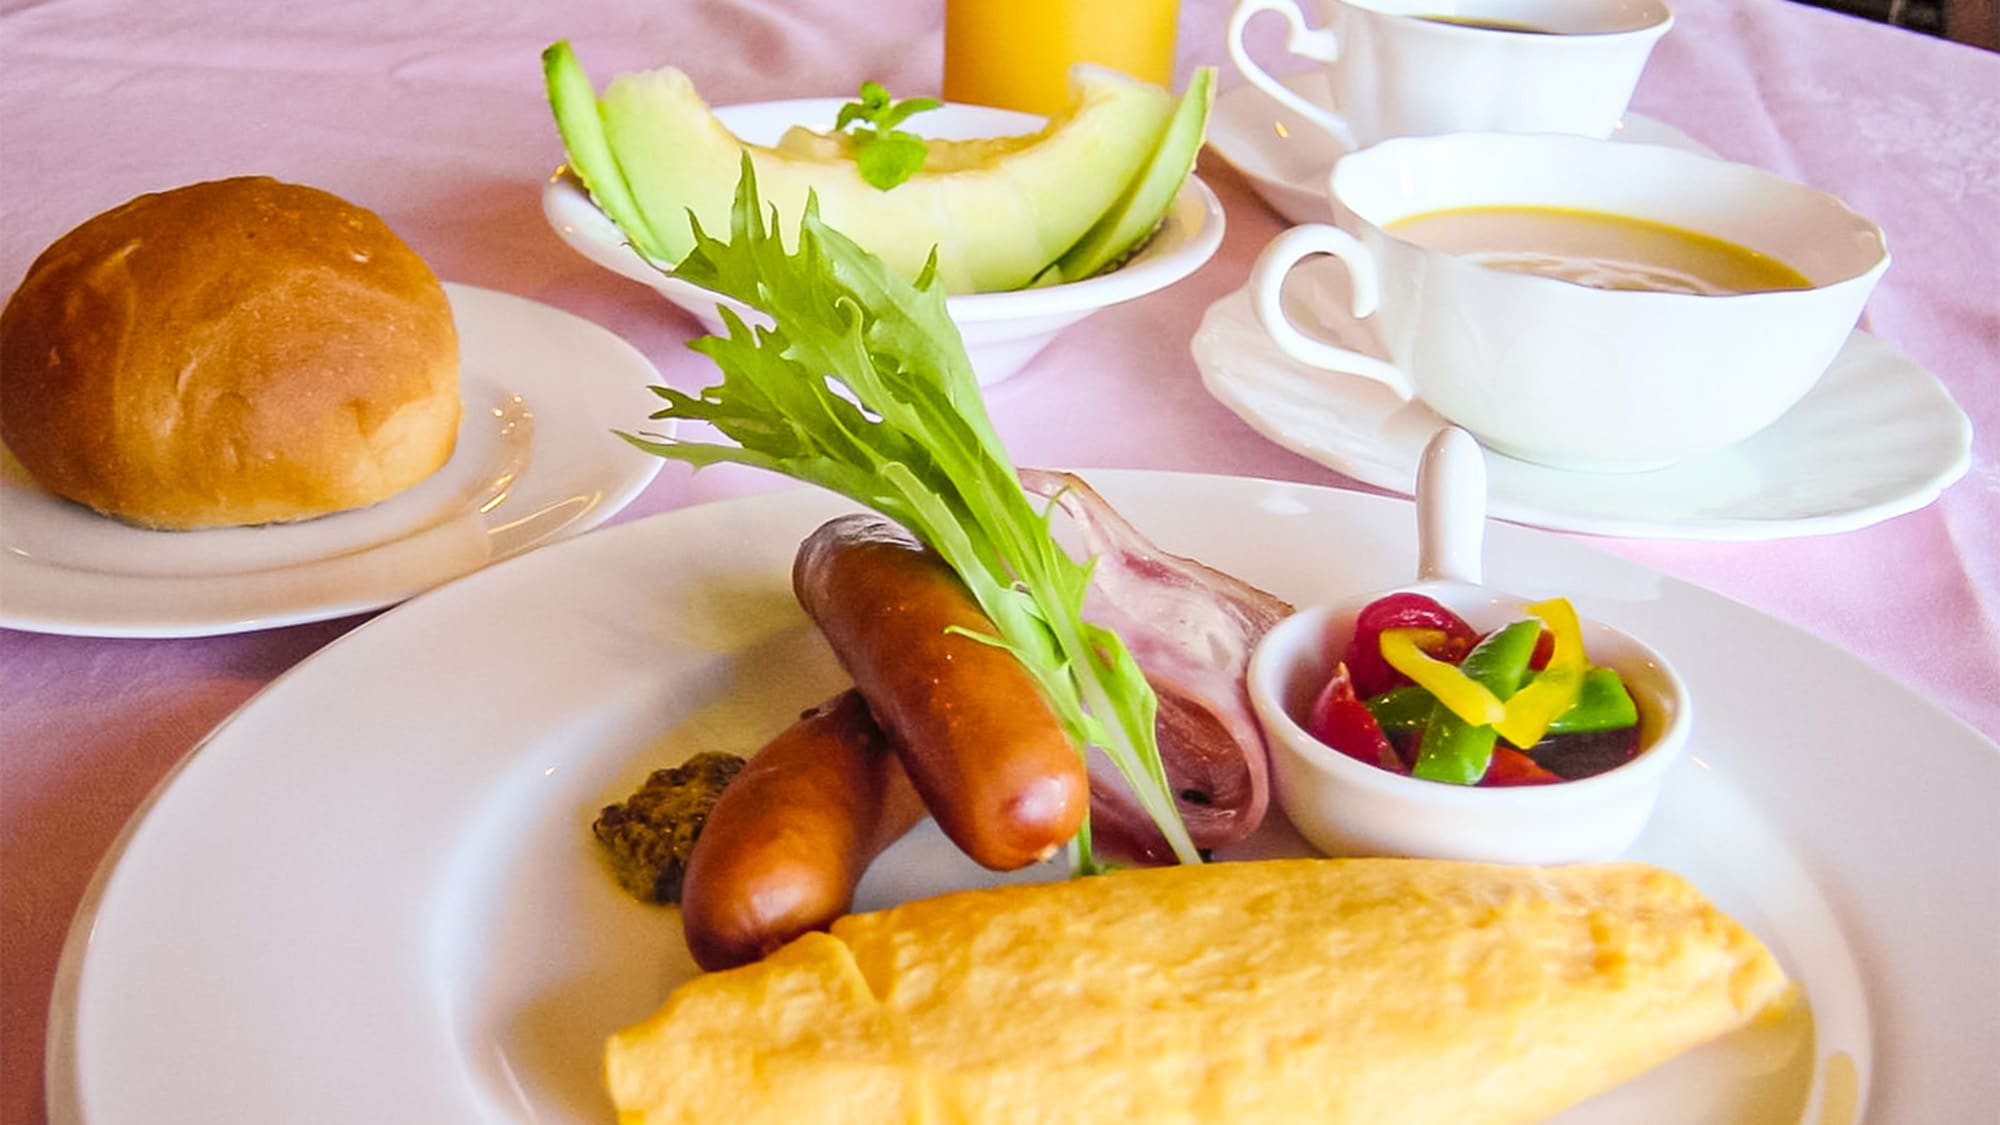 ・ [Breakfast example] Wake up refreshed with a breakfast with bread, omelet, salad and fruits.